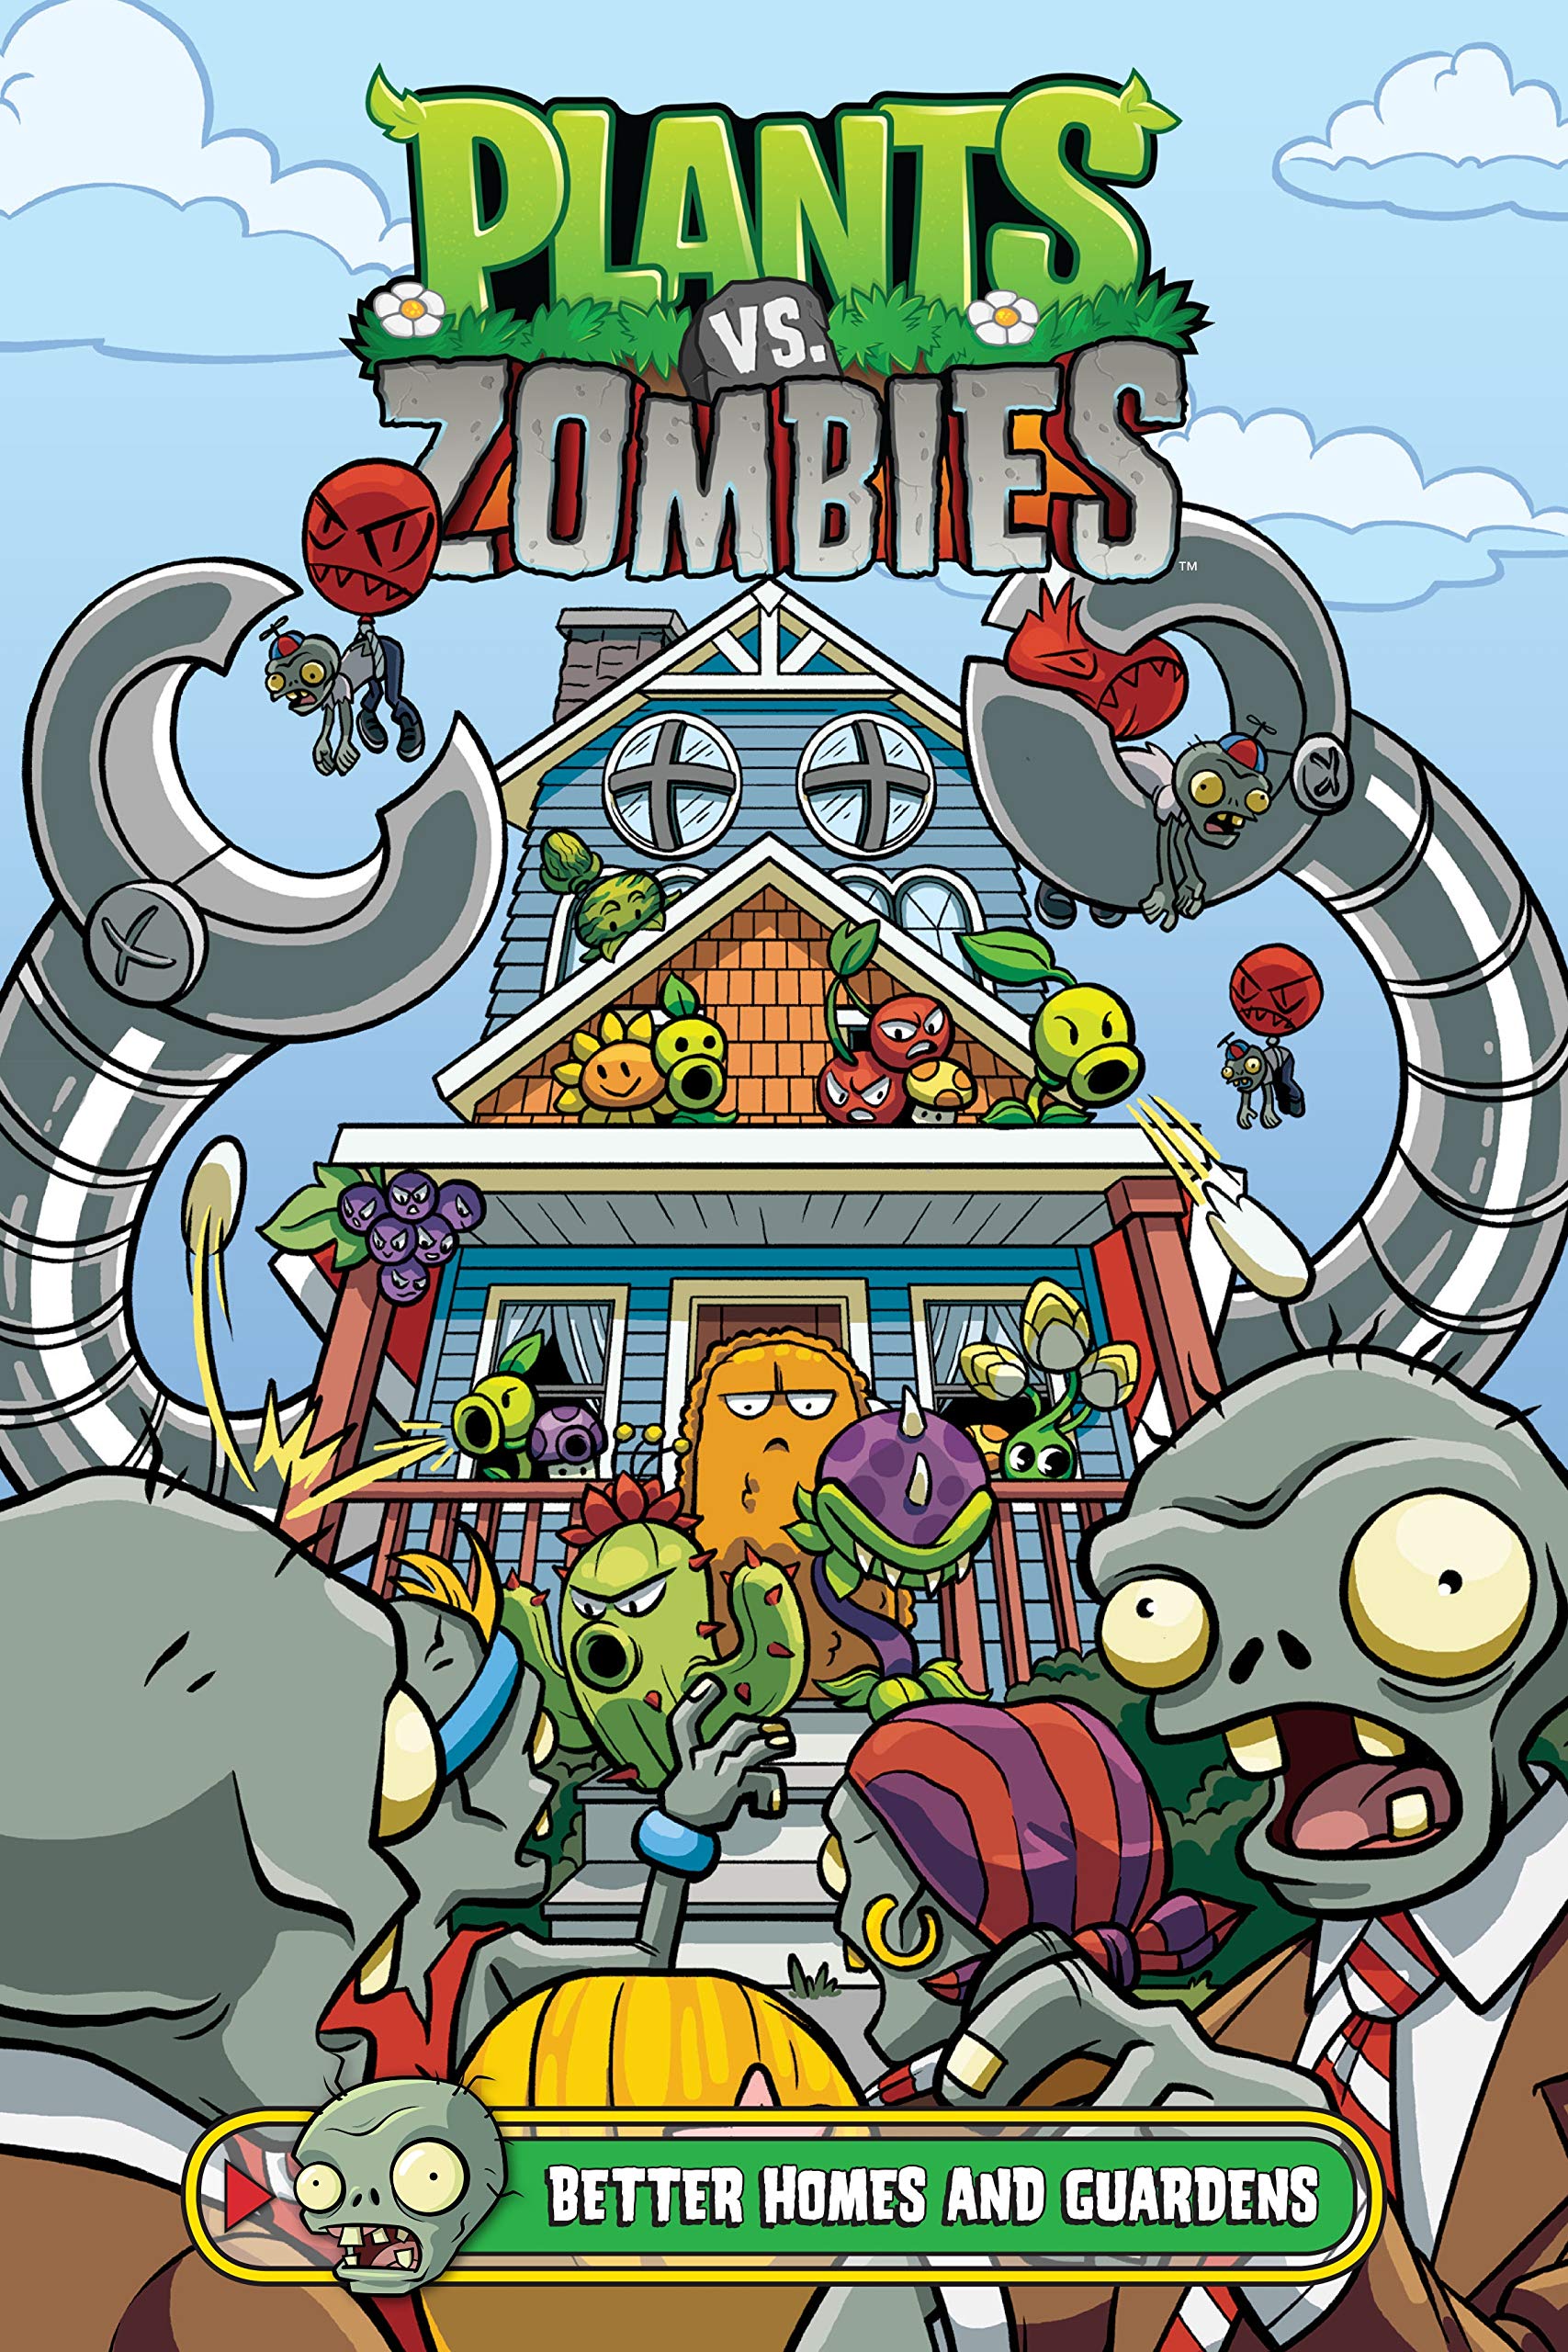 Plants vs. zombies. Better homes and guardens 책표지